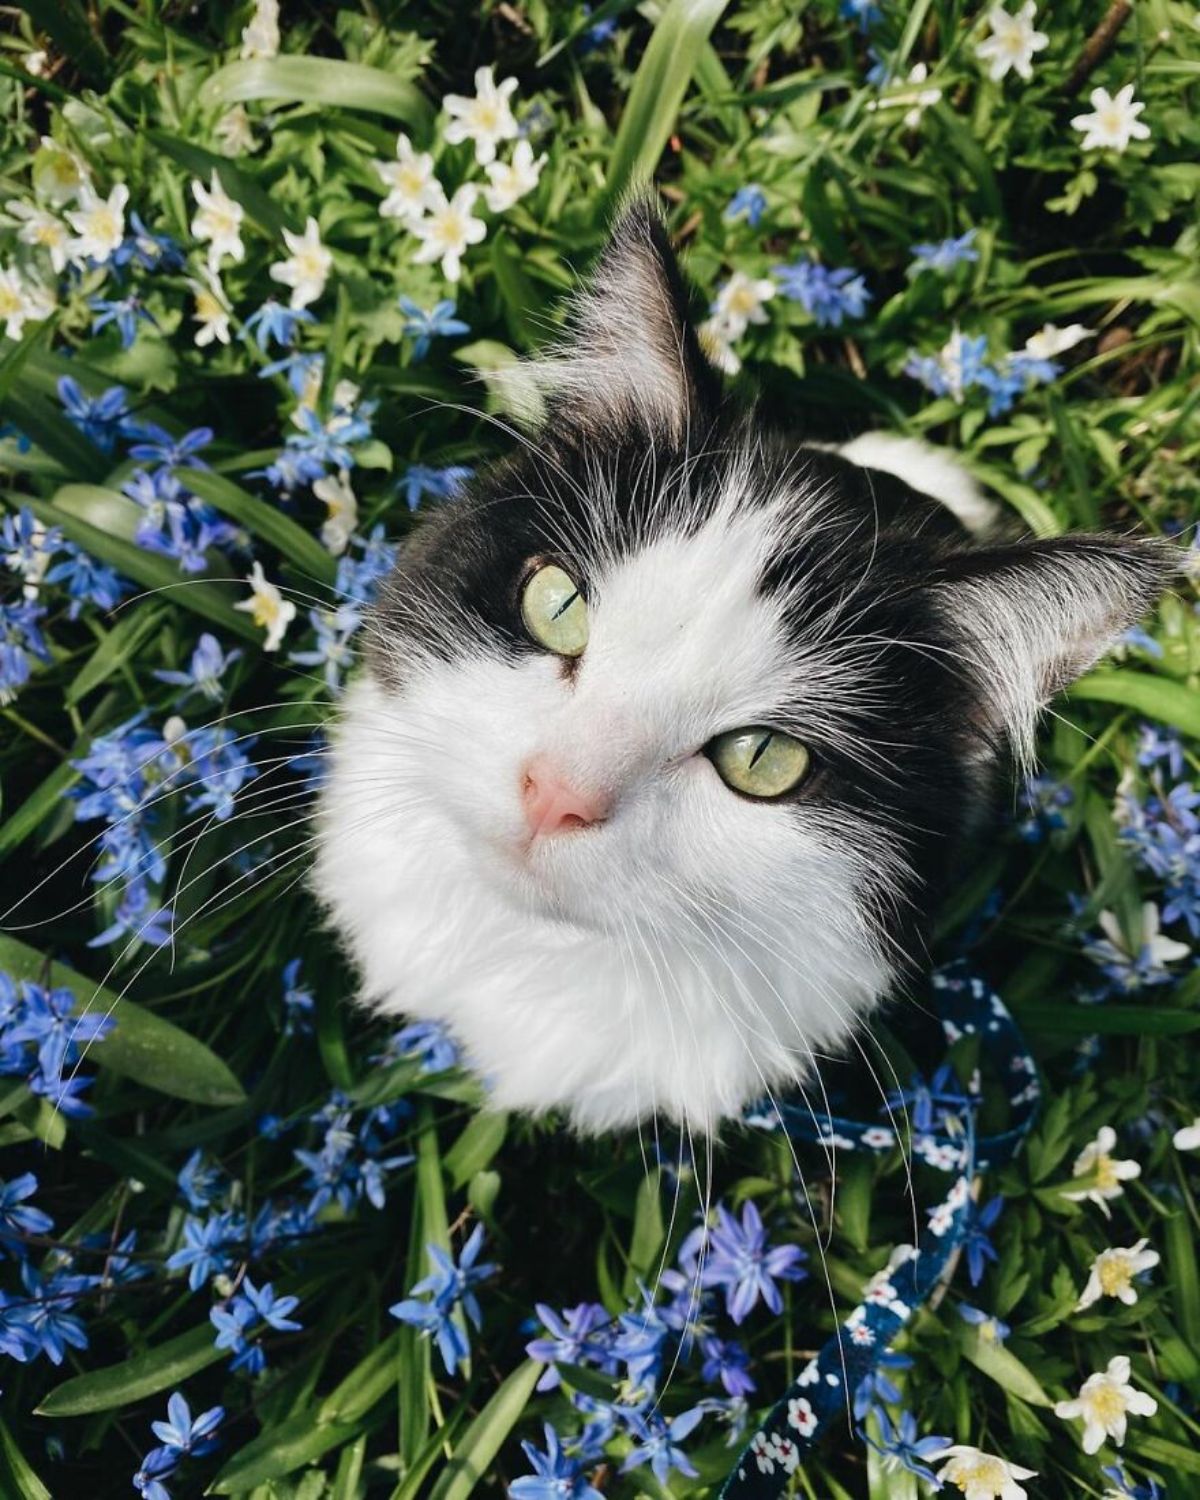 black and white fluffy cat sitting in the middle of blue flower plants and looking up